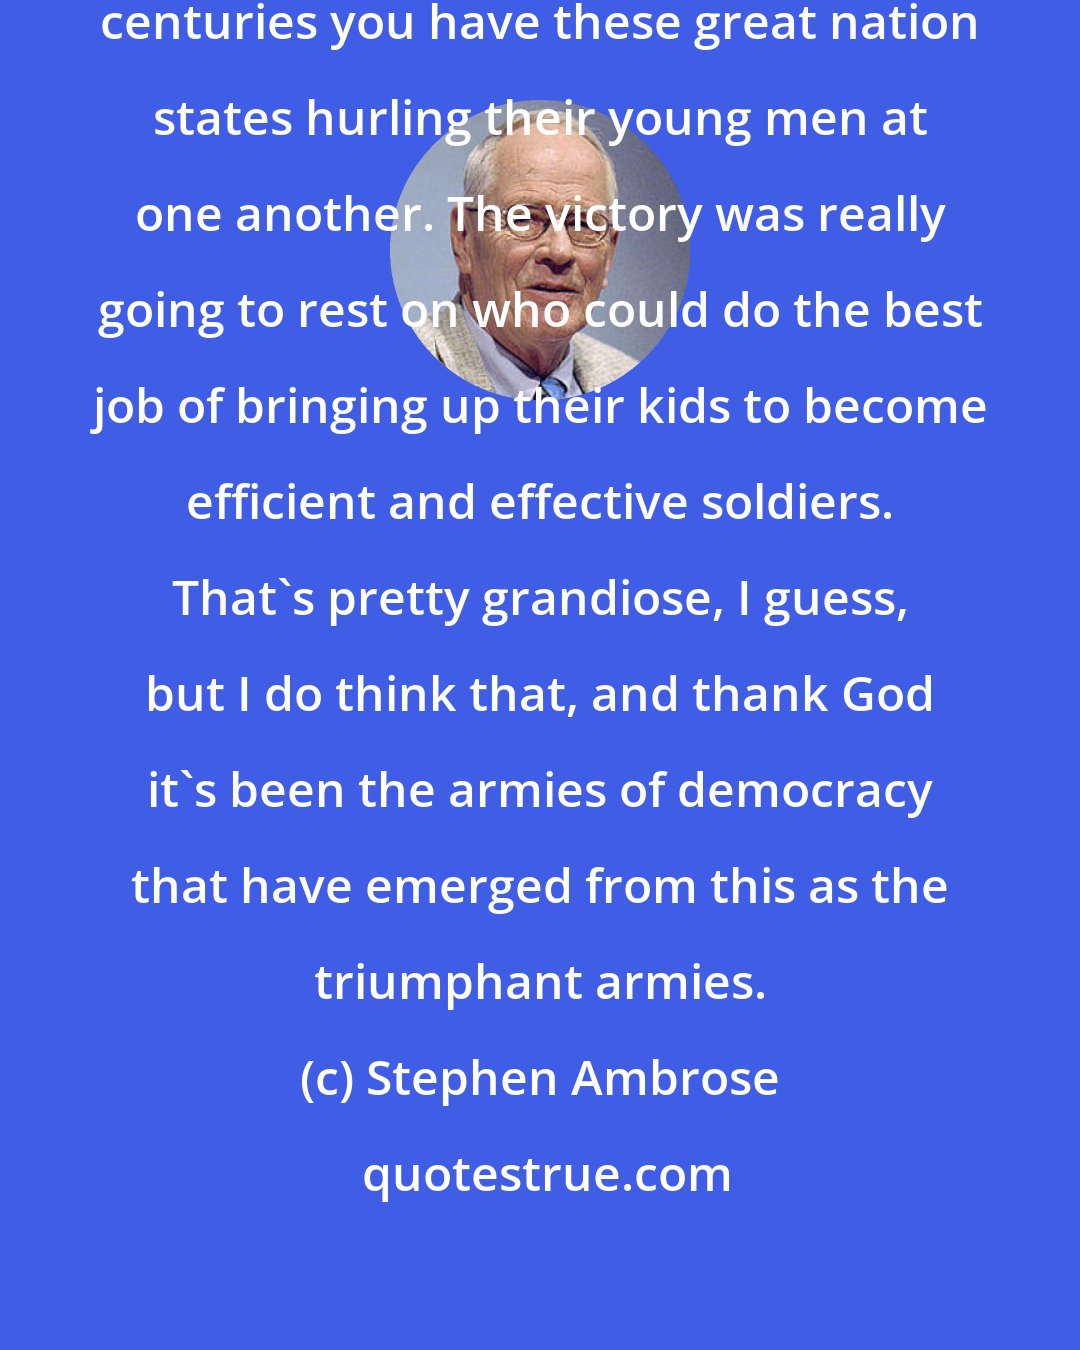 Stephen Ambrose: In the nineteenth and twentieth centuries you have these great nation states hurling their young men at one another. The victory was really going to rest on who could do the best job of bringing up their kids to become efficient and effective soldiers. That's pretty grandiose, I guess, but I do think that, and thank God it's been the armies of democracy that have emerged from this as the triumphant armies.